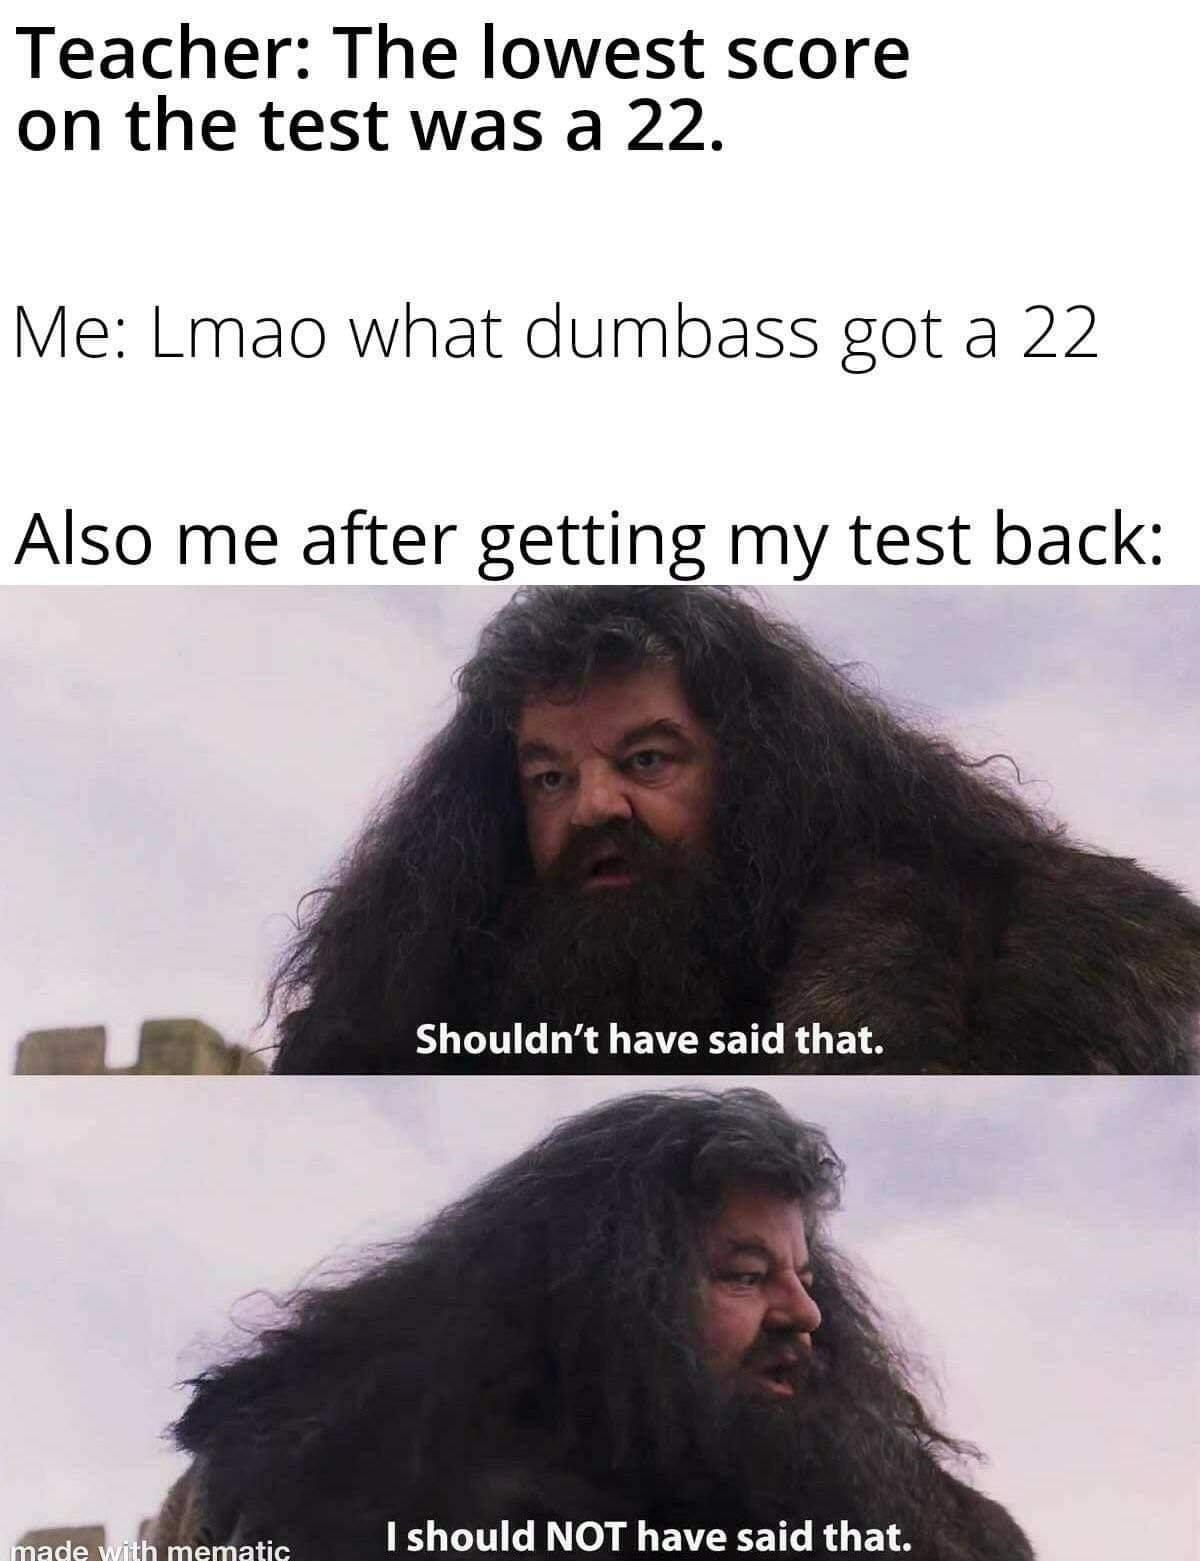 if you divide 2020 by 5 you get 404 - Teacher The lowest score on the test was a 22. Me Lmao what dumbass got a 22 Also me after getting my test back Shouldn't have said that. I should Not have said that. made with mematic